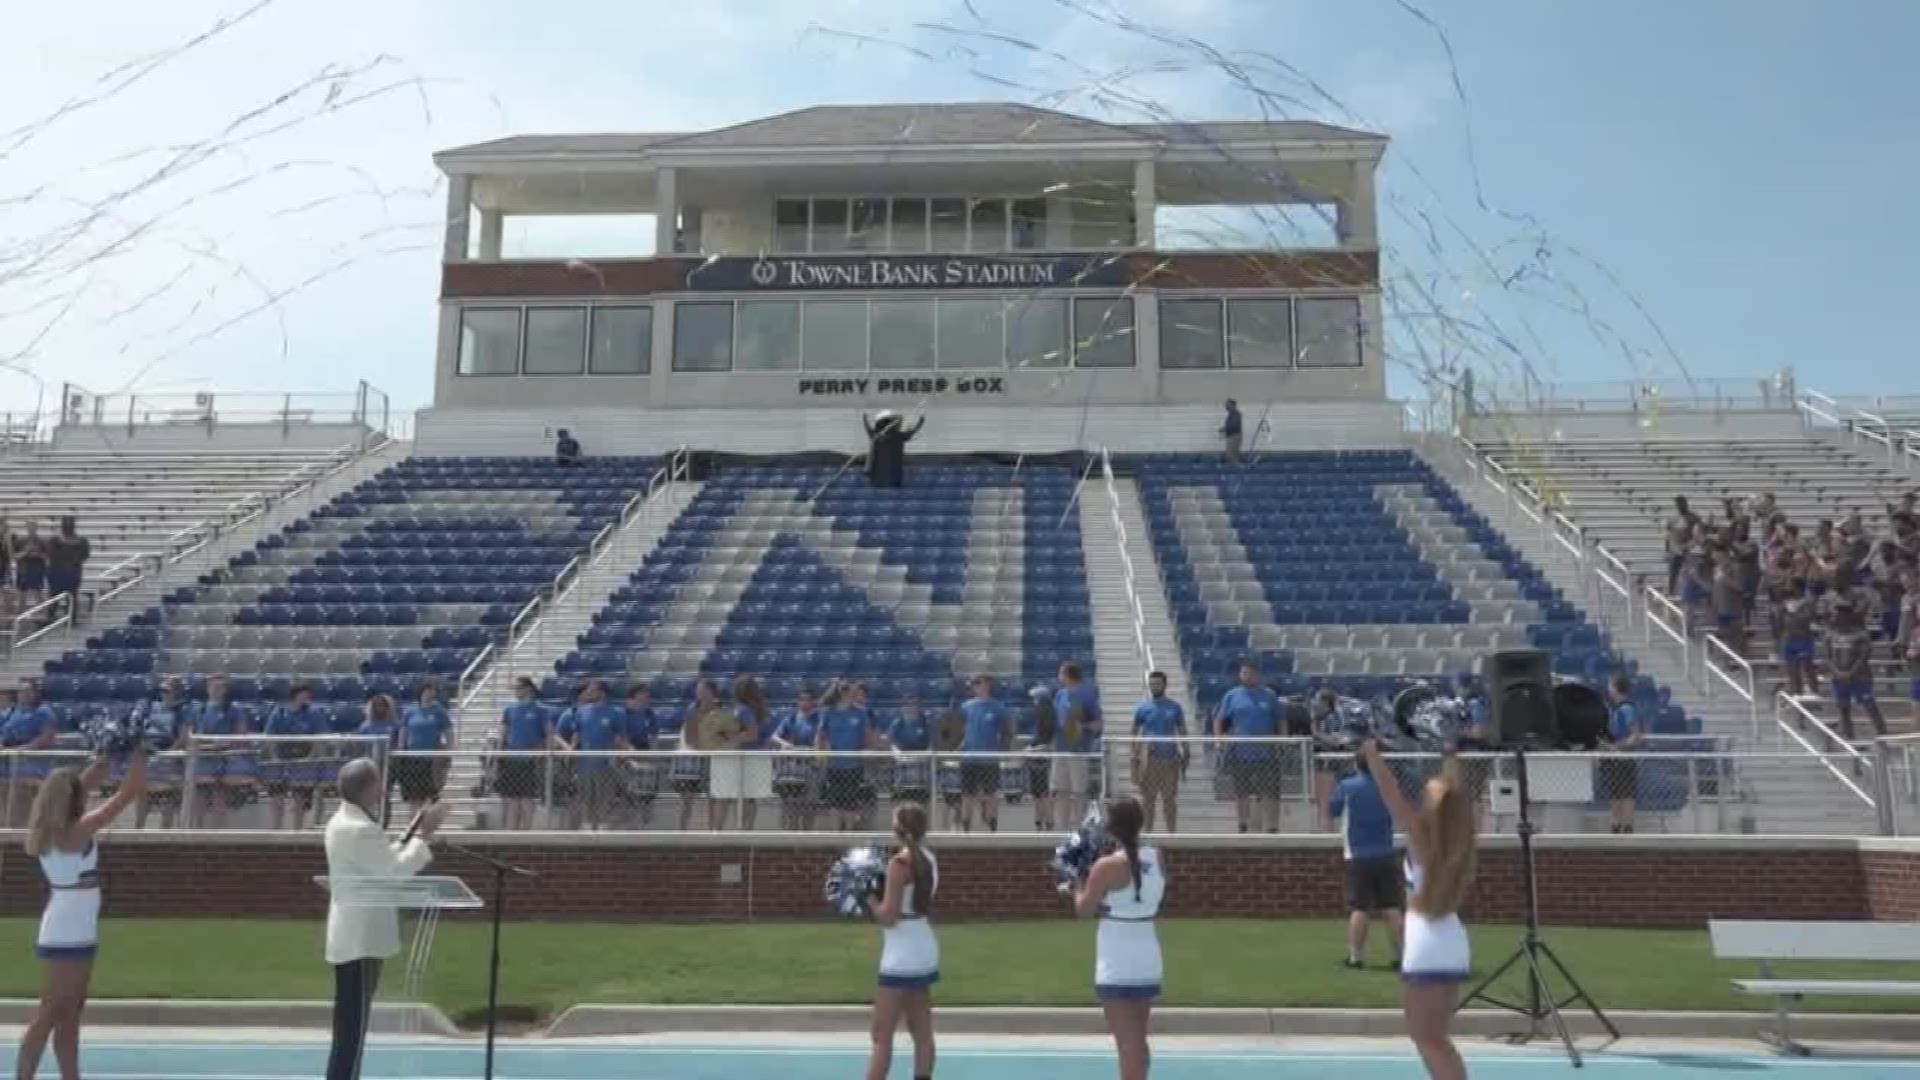 Christopher Newport University's football stadium will now be known as Towne Bank Stadium. The name change comes after Towne Bank pledged a $1 million gift in 2014 to go towards the university's athletics, the Ferguson Center for the Arts and the Towne Bank Leadership Scholarships.